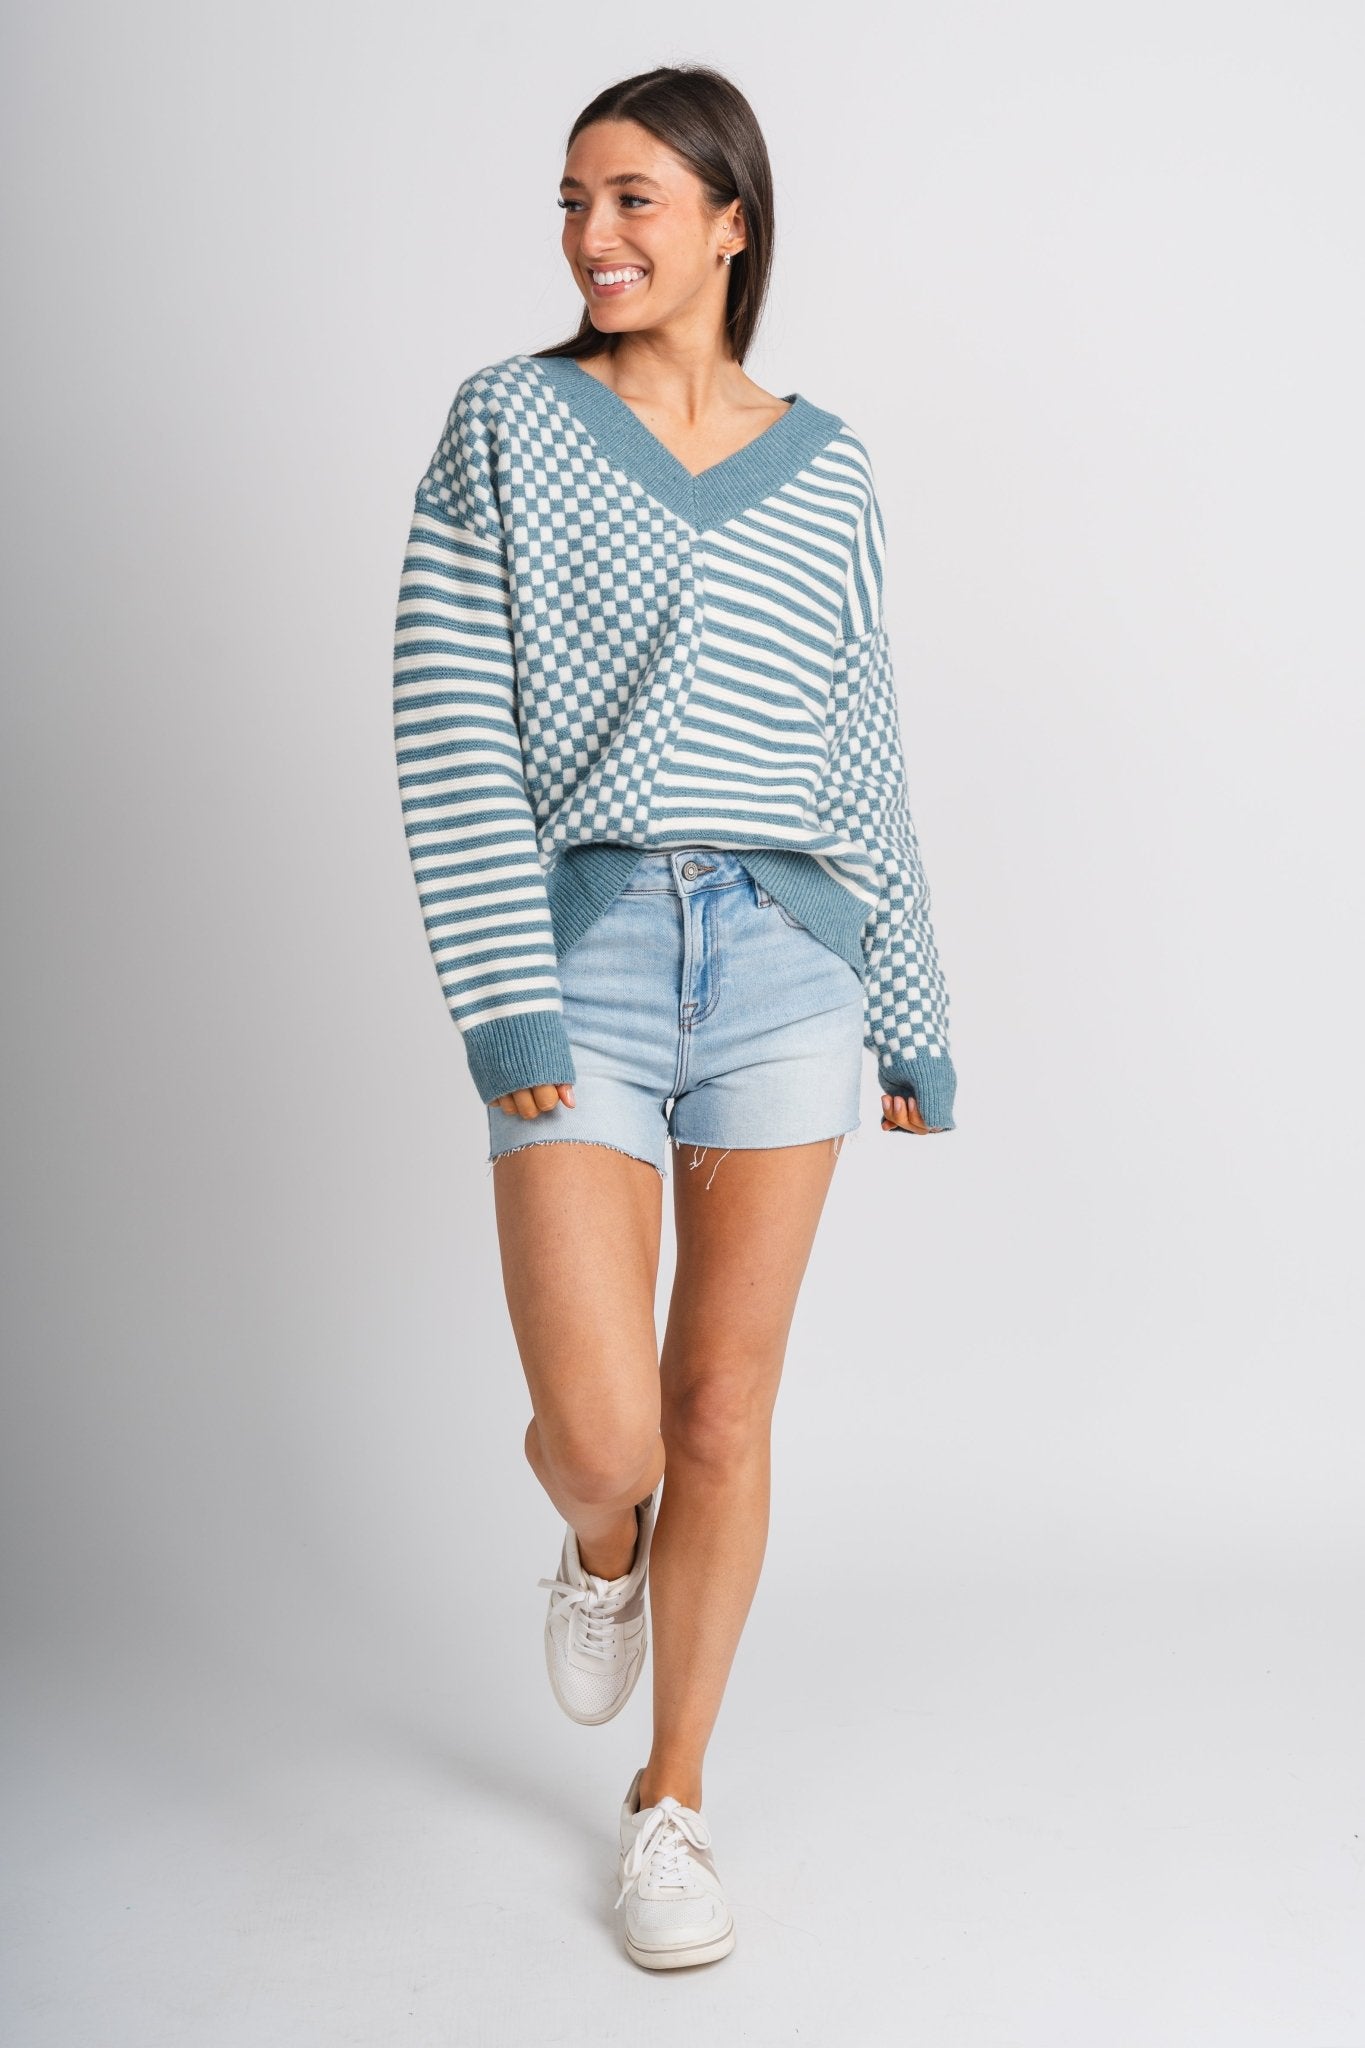 Checkered sweater ivory/blue – Unique Sweaters | Lounging Sweaters and Womens Fashion Sweaters at Lush Fashion Lounge Boutique in Oklahoma City